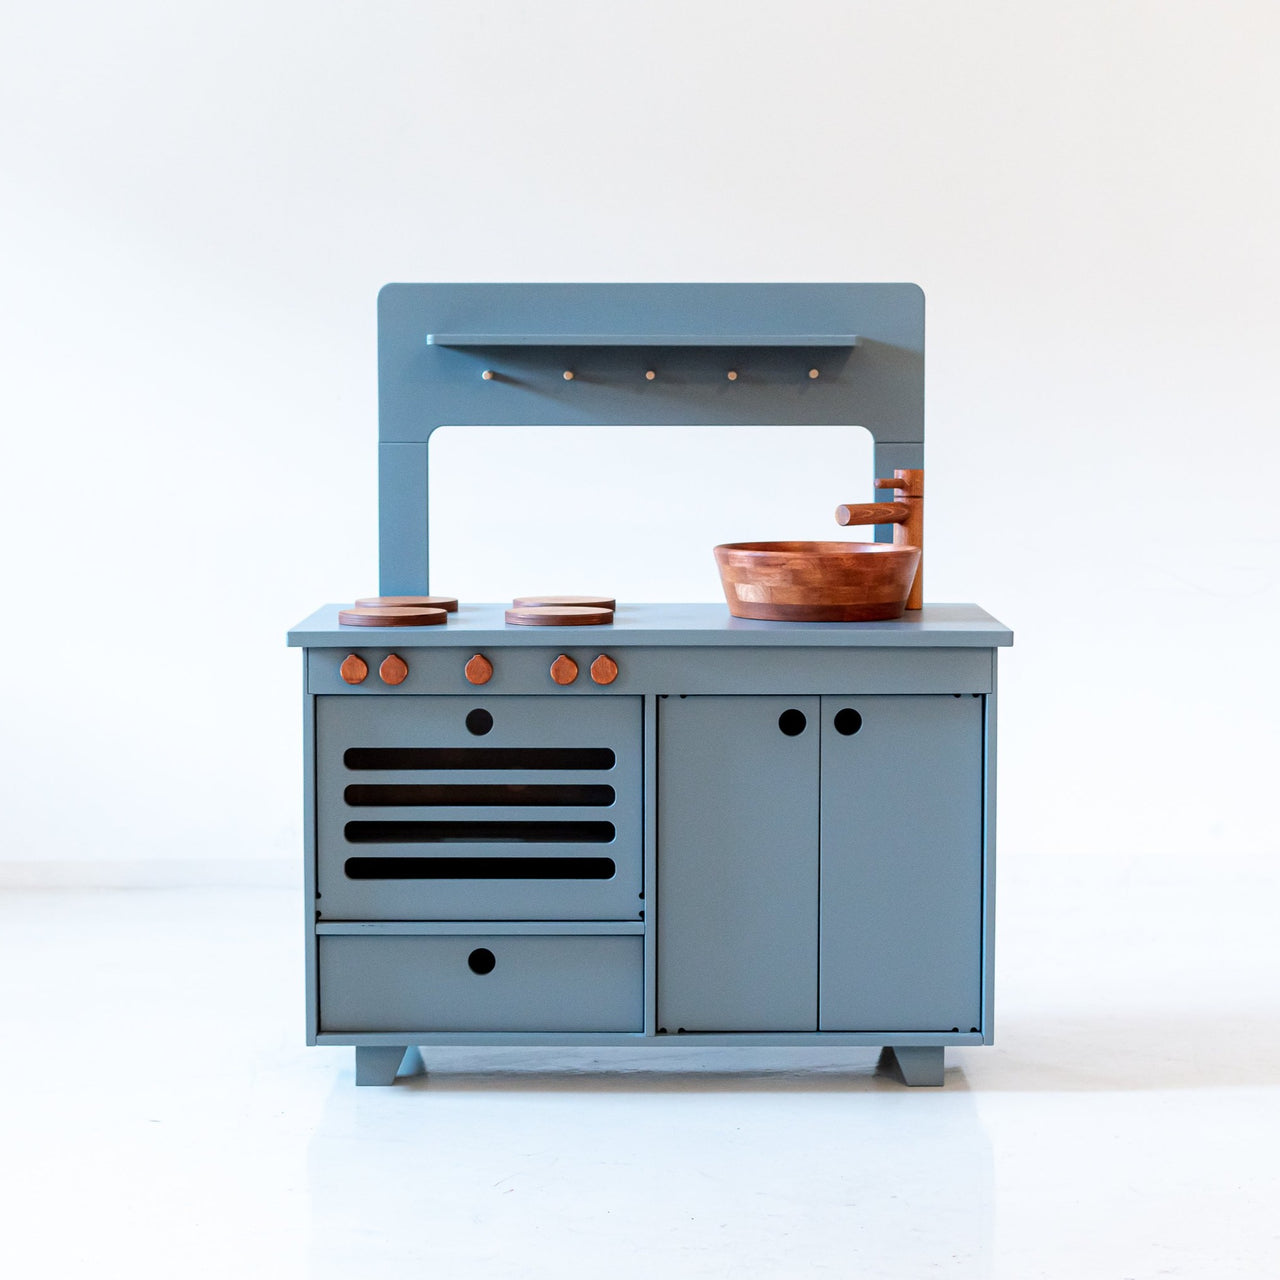 Dusty Blue Wooden Play Kitchen - MIDMINI - Plywood Furniture